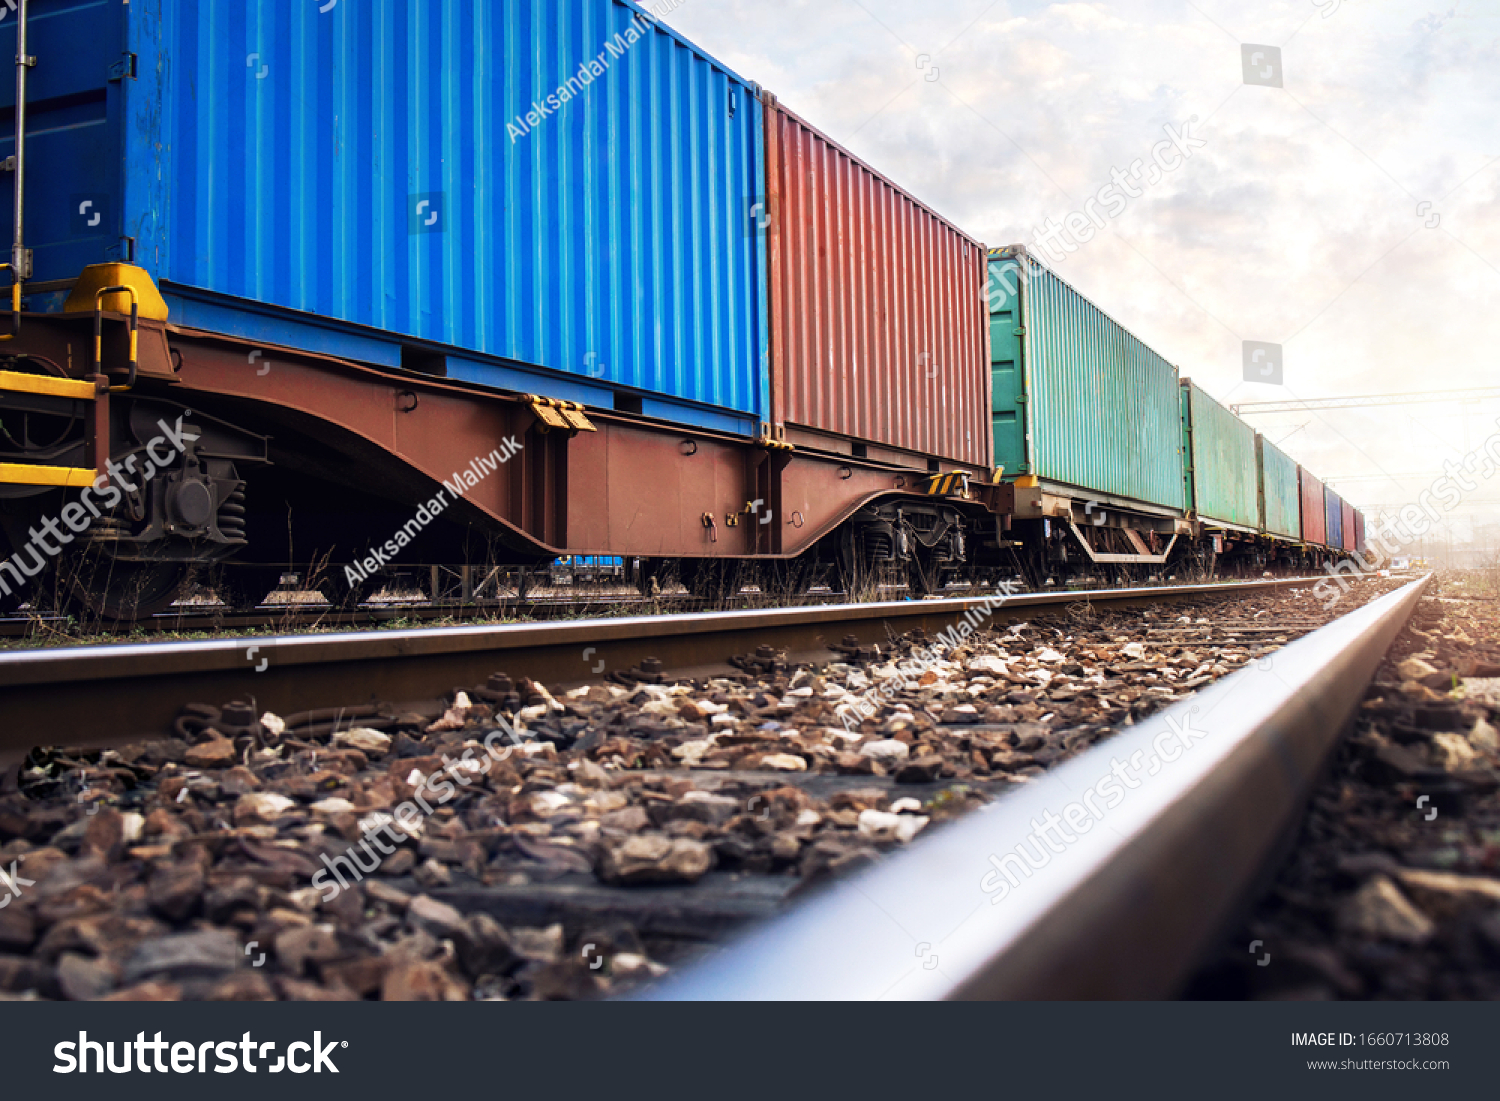 Train wagons carrying cargo containers for shipping companies. Distribution and freight transportation using railroads. #1660713808